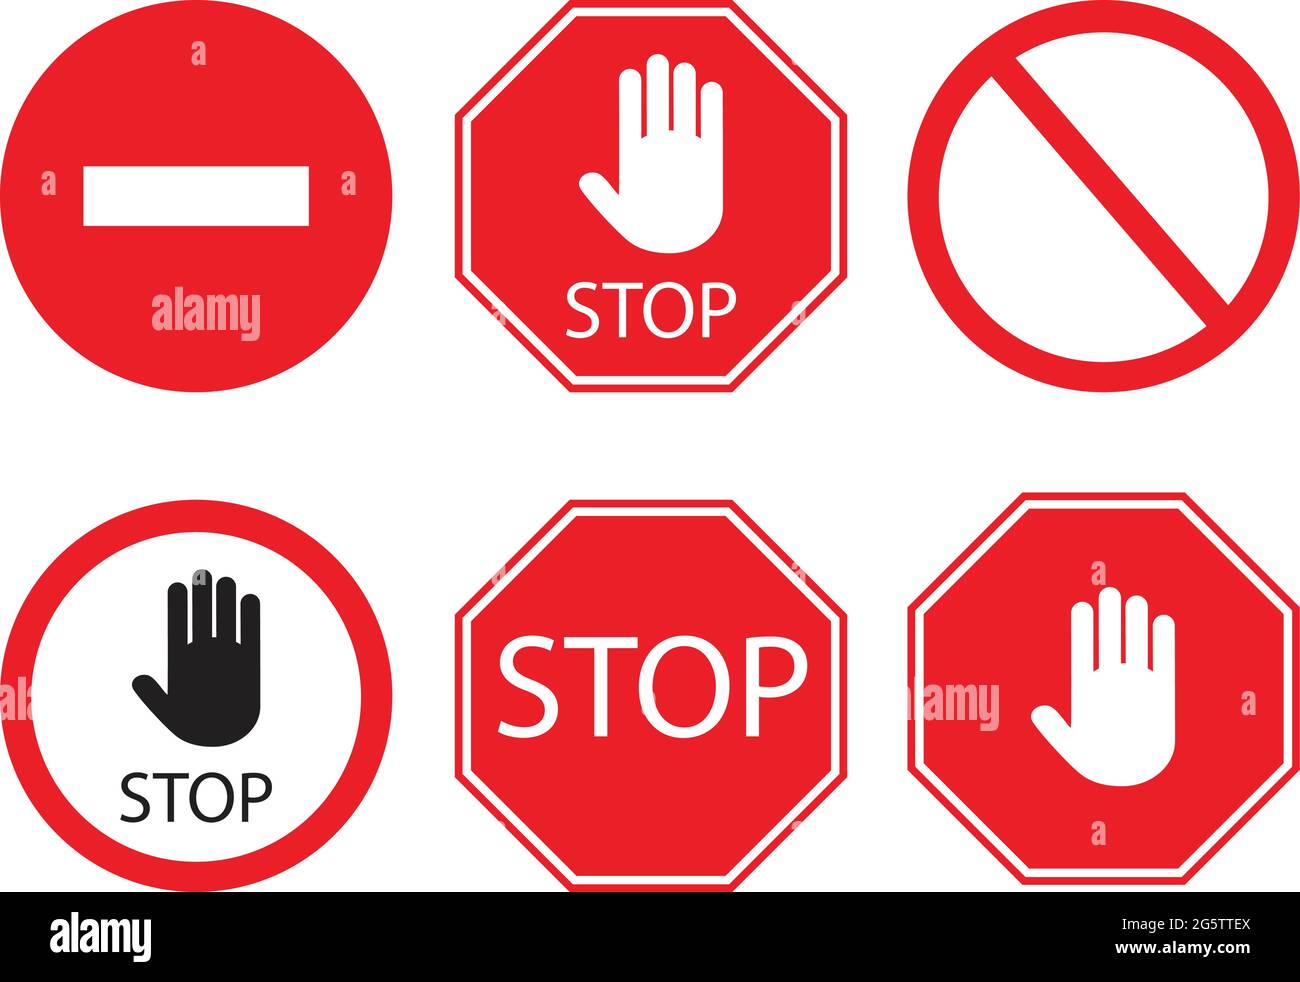 Stop signs collection in red and white, traffic sign to notify drivers and provide safe and orderly street operation. Vector flat style illustration i Stock Vector